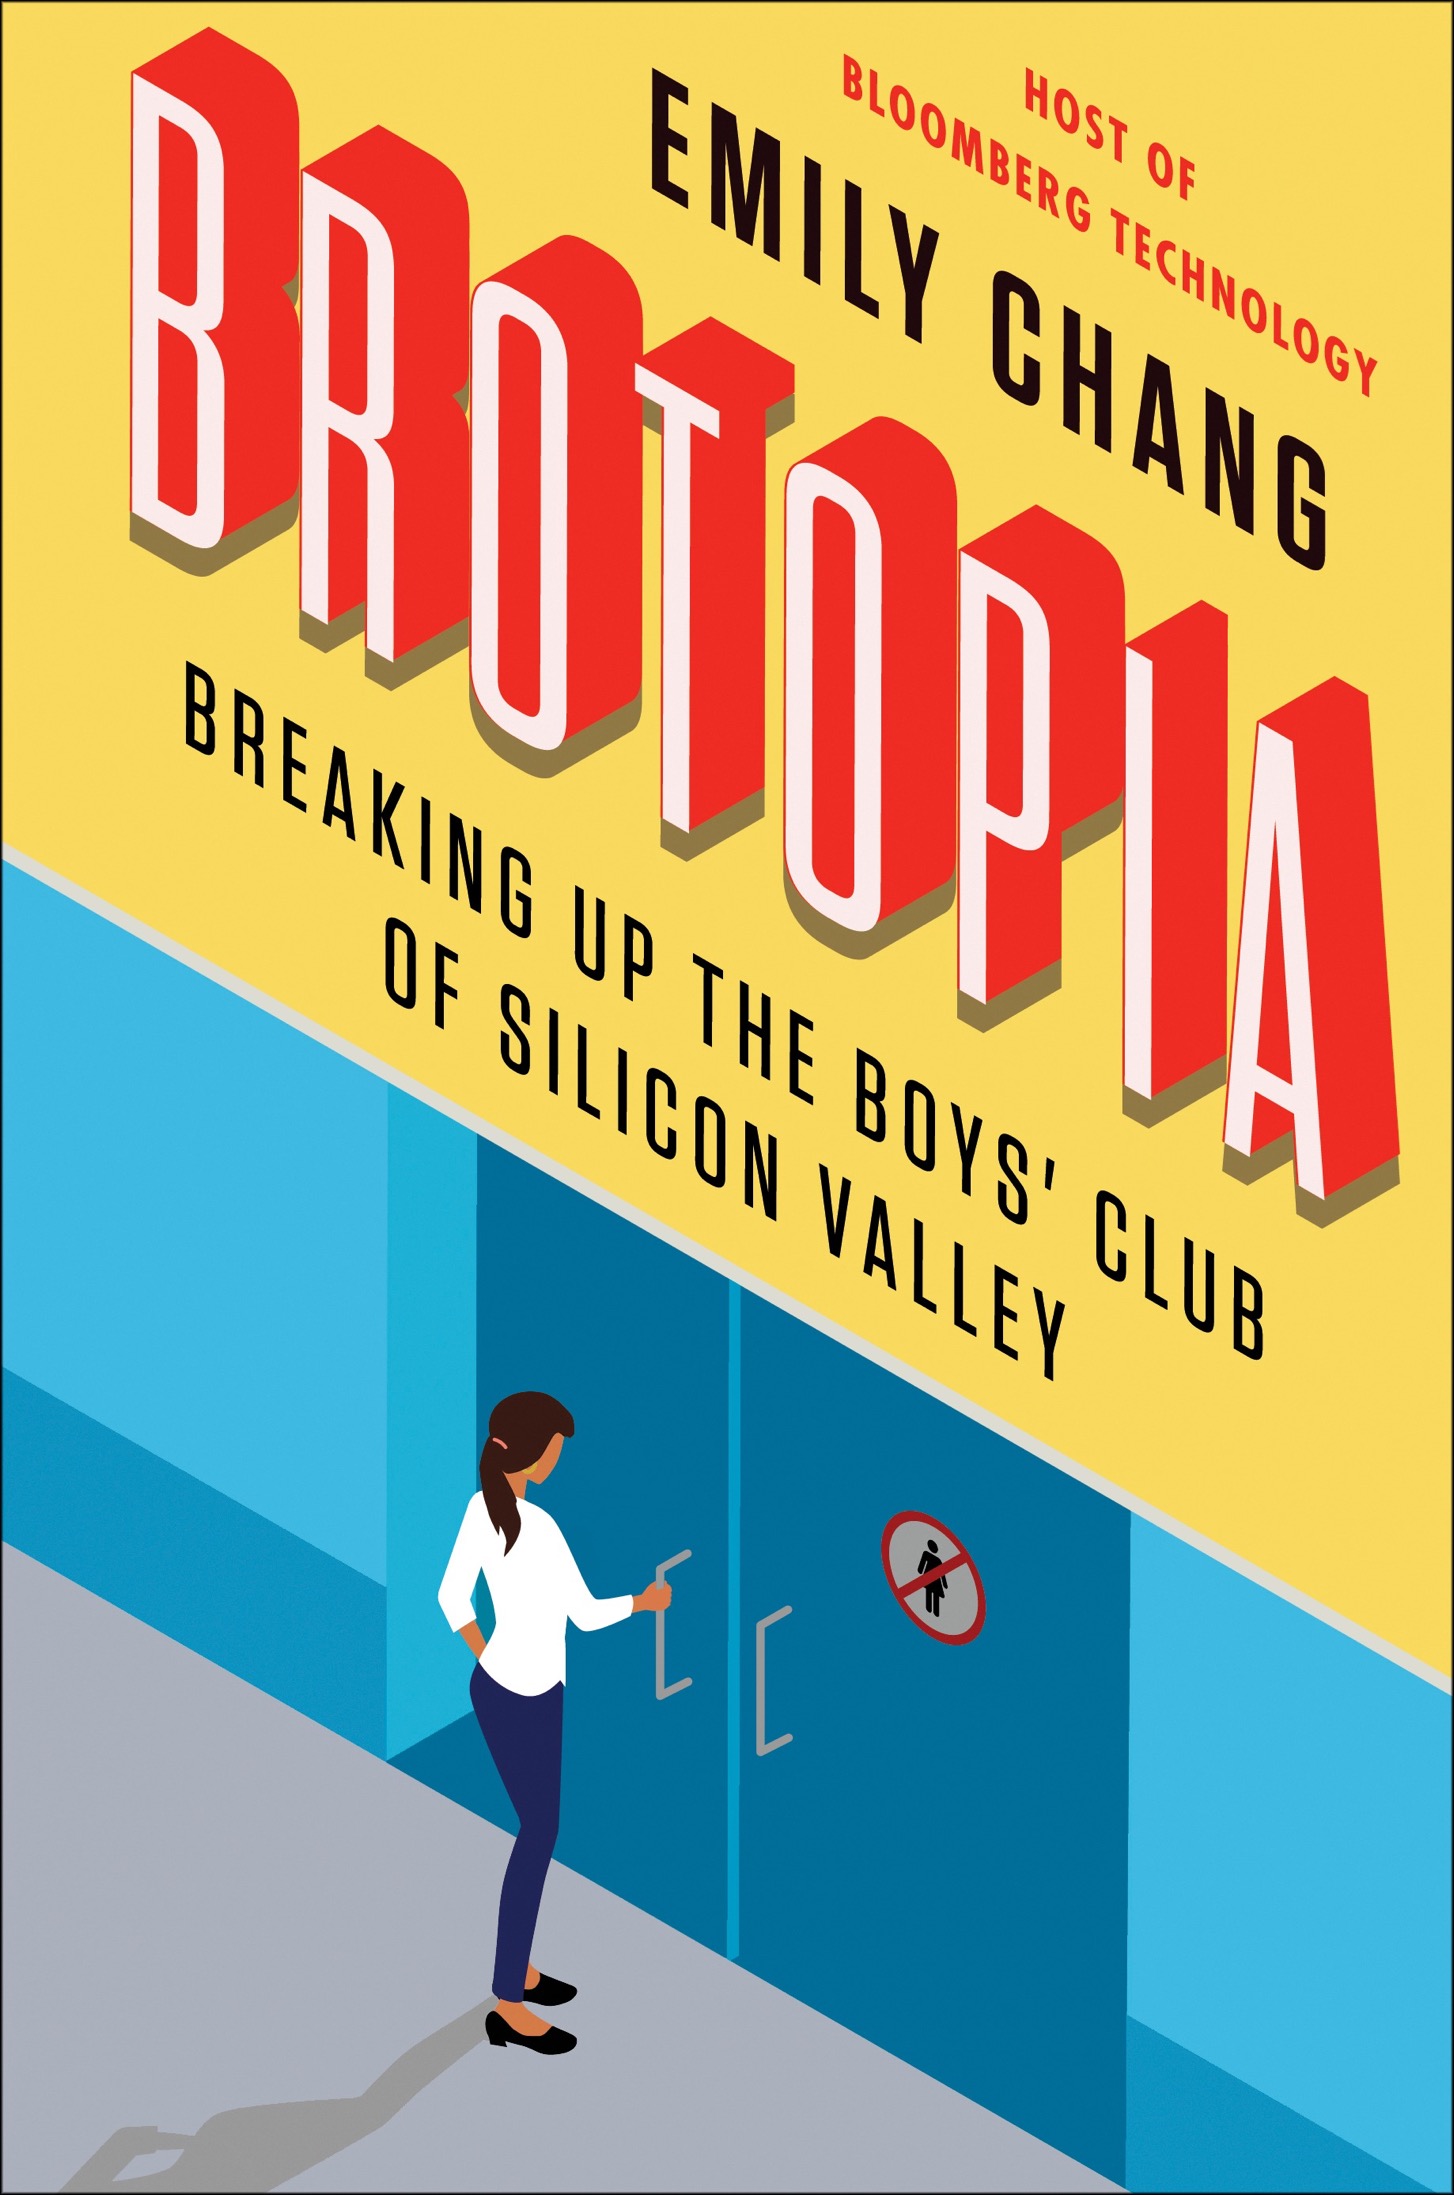 Brotopia breaking up the boys club of Silicon Valley - image 1